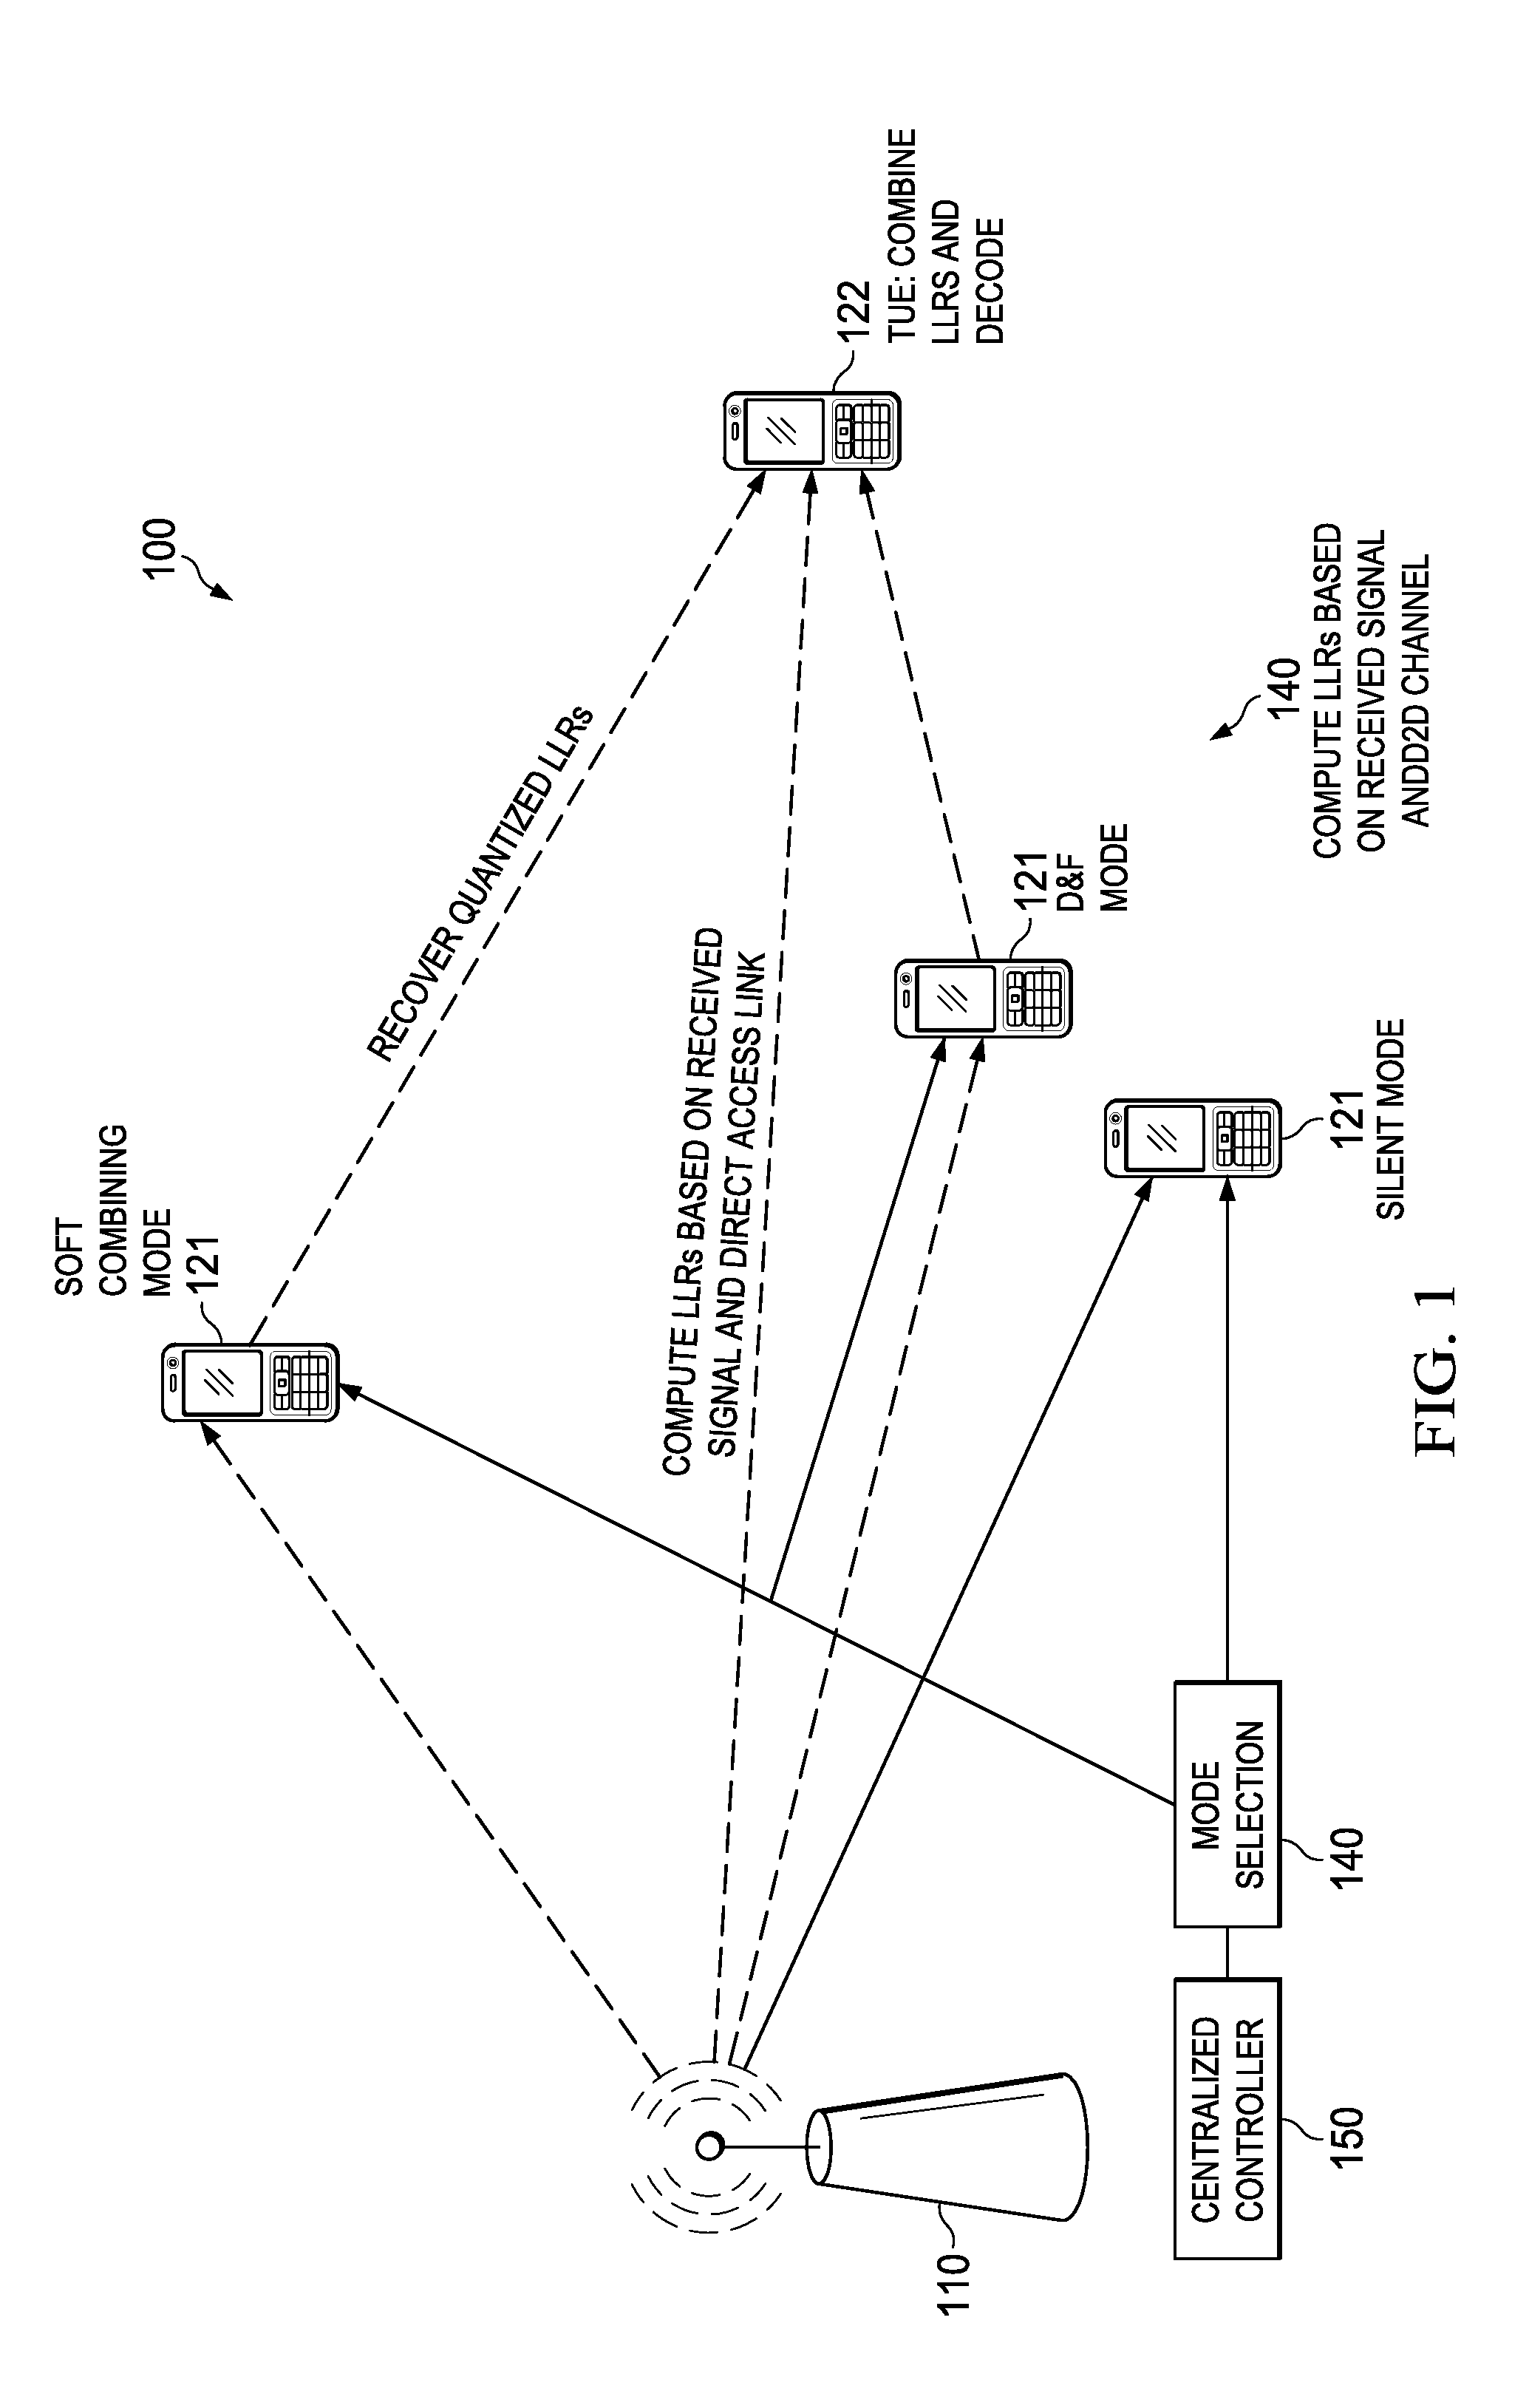 System and Method for Adaptive Cooperation Mode Selection Strategies for Wireless Networks